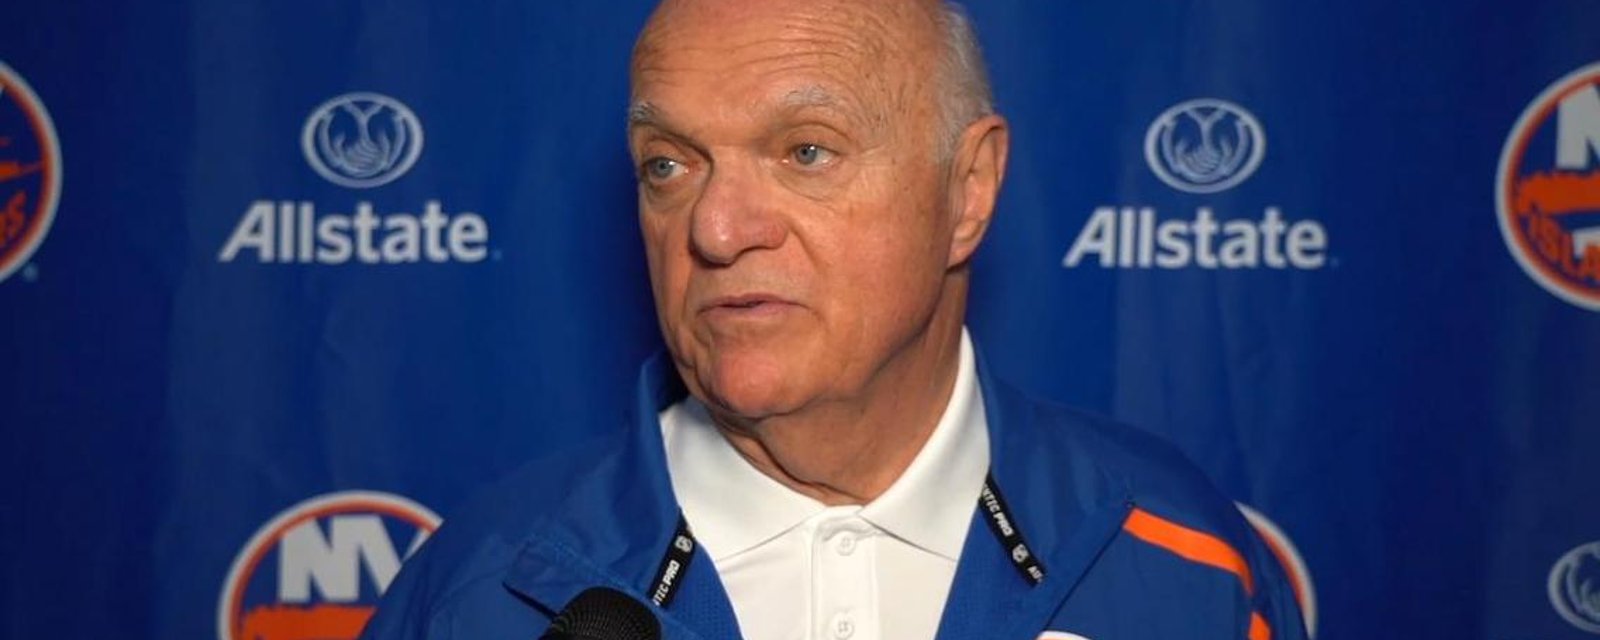 Lou Lamoriello was “asking what's out there” at the GM meeting